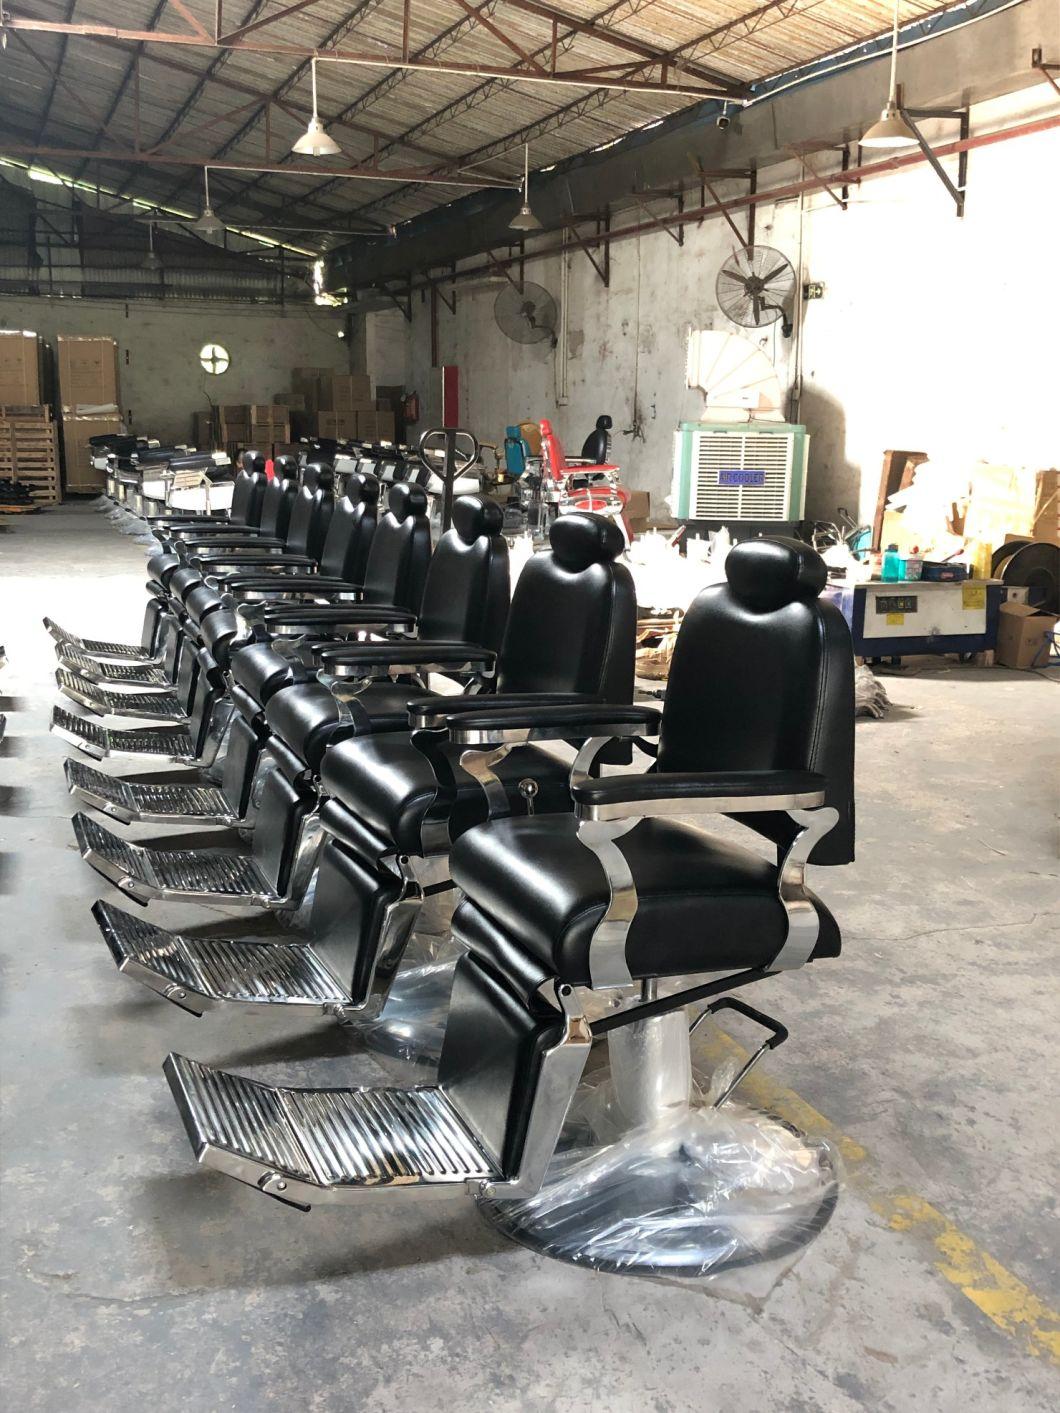 Strong Reclining Salon Barber Chair Popular Furniture for Sale